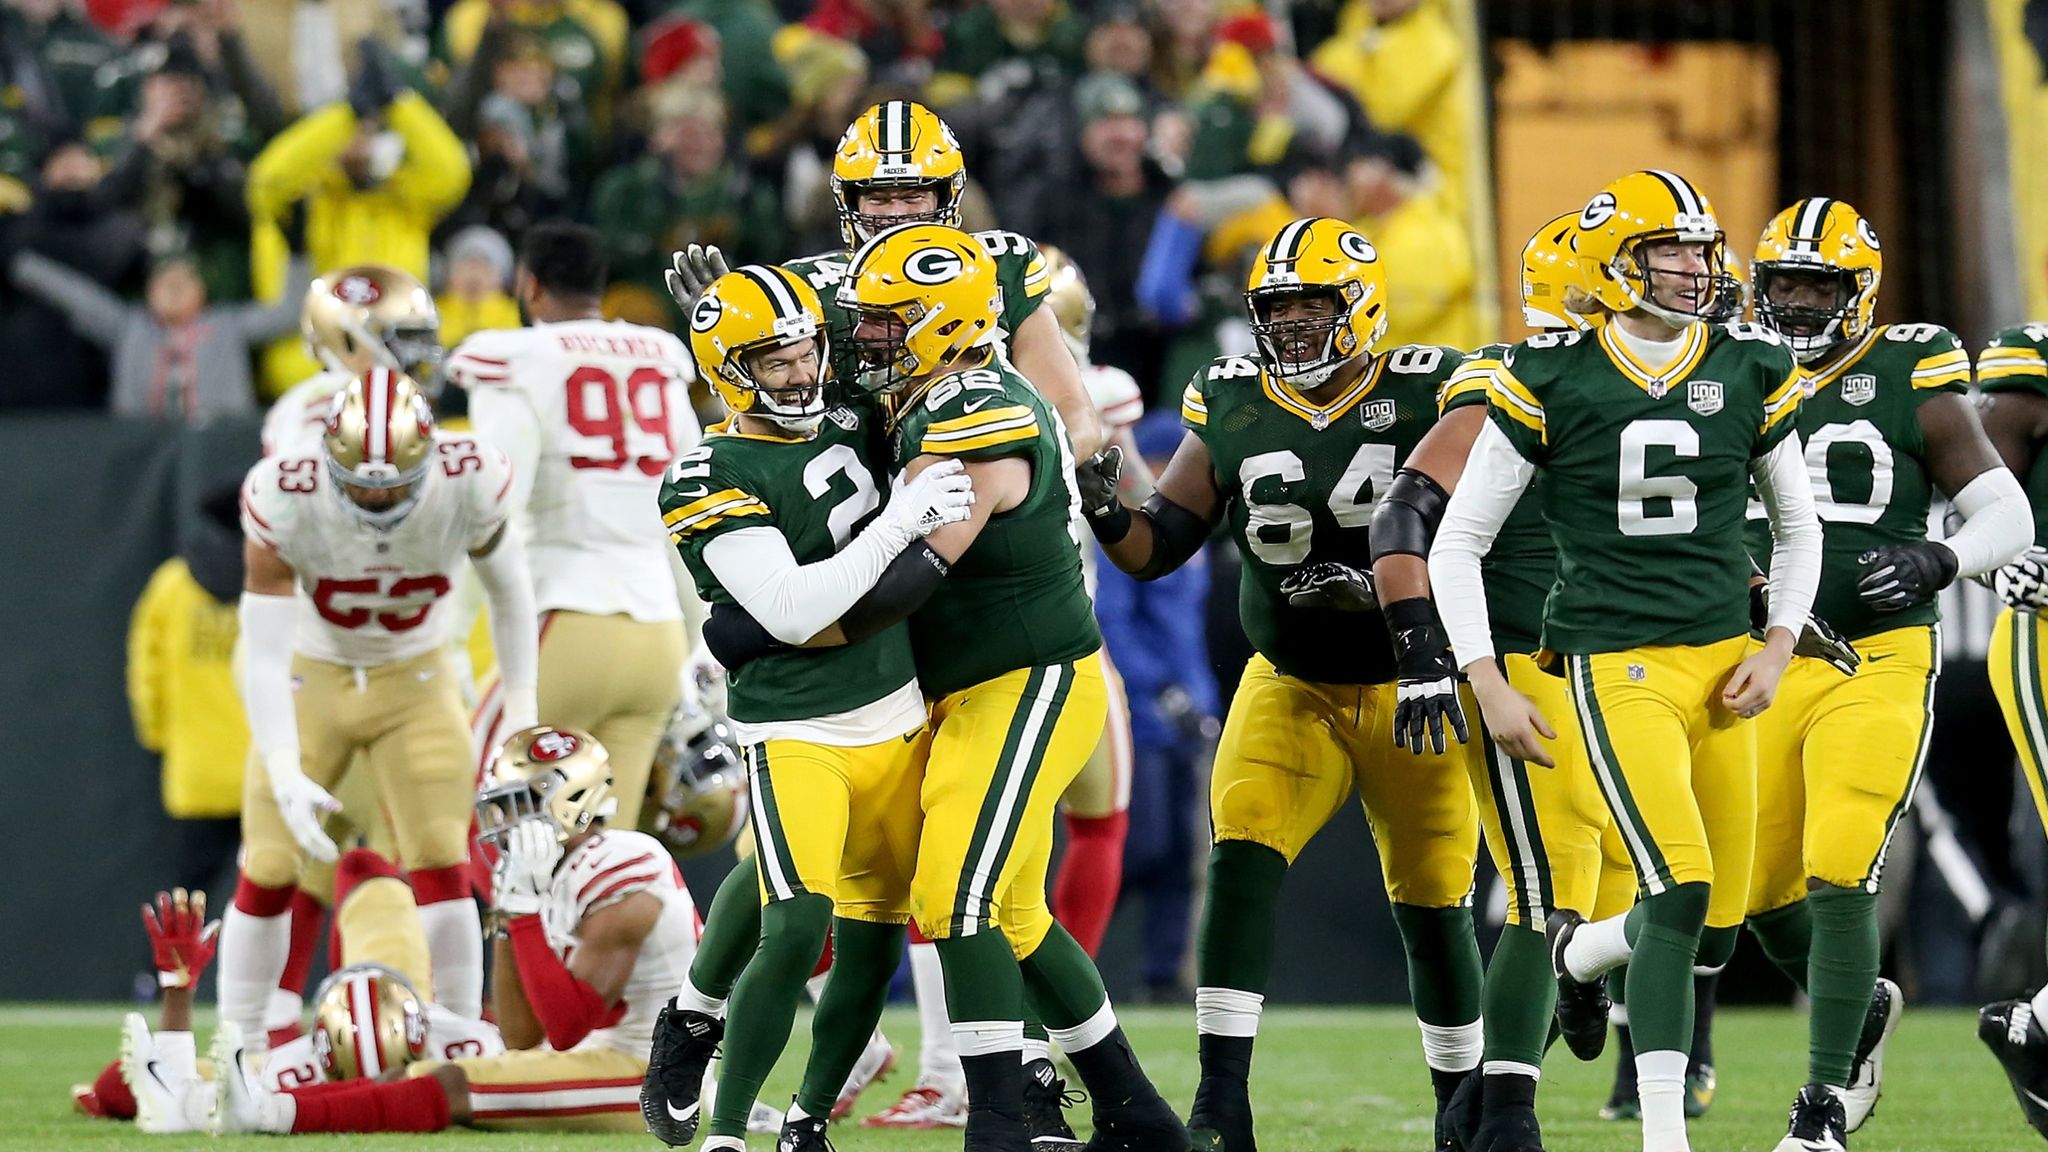 49ers upset Packers behind Gould's late field goal to advance to